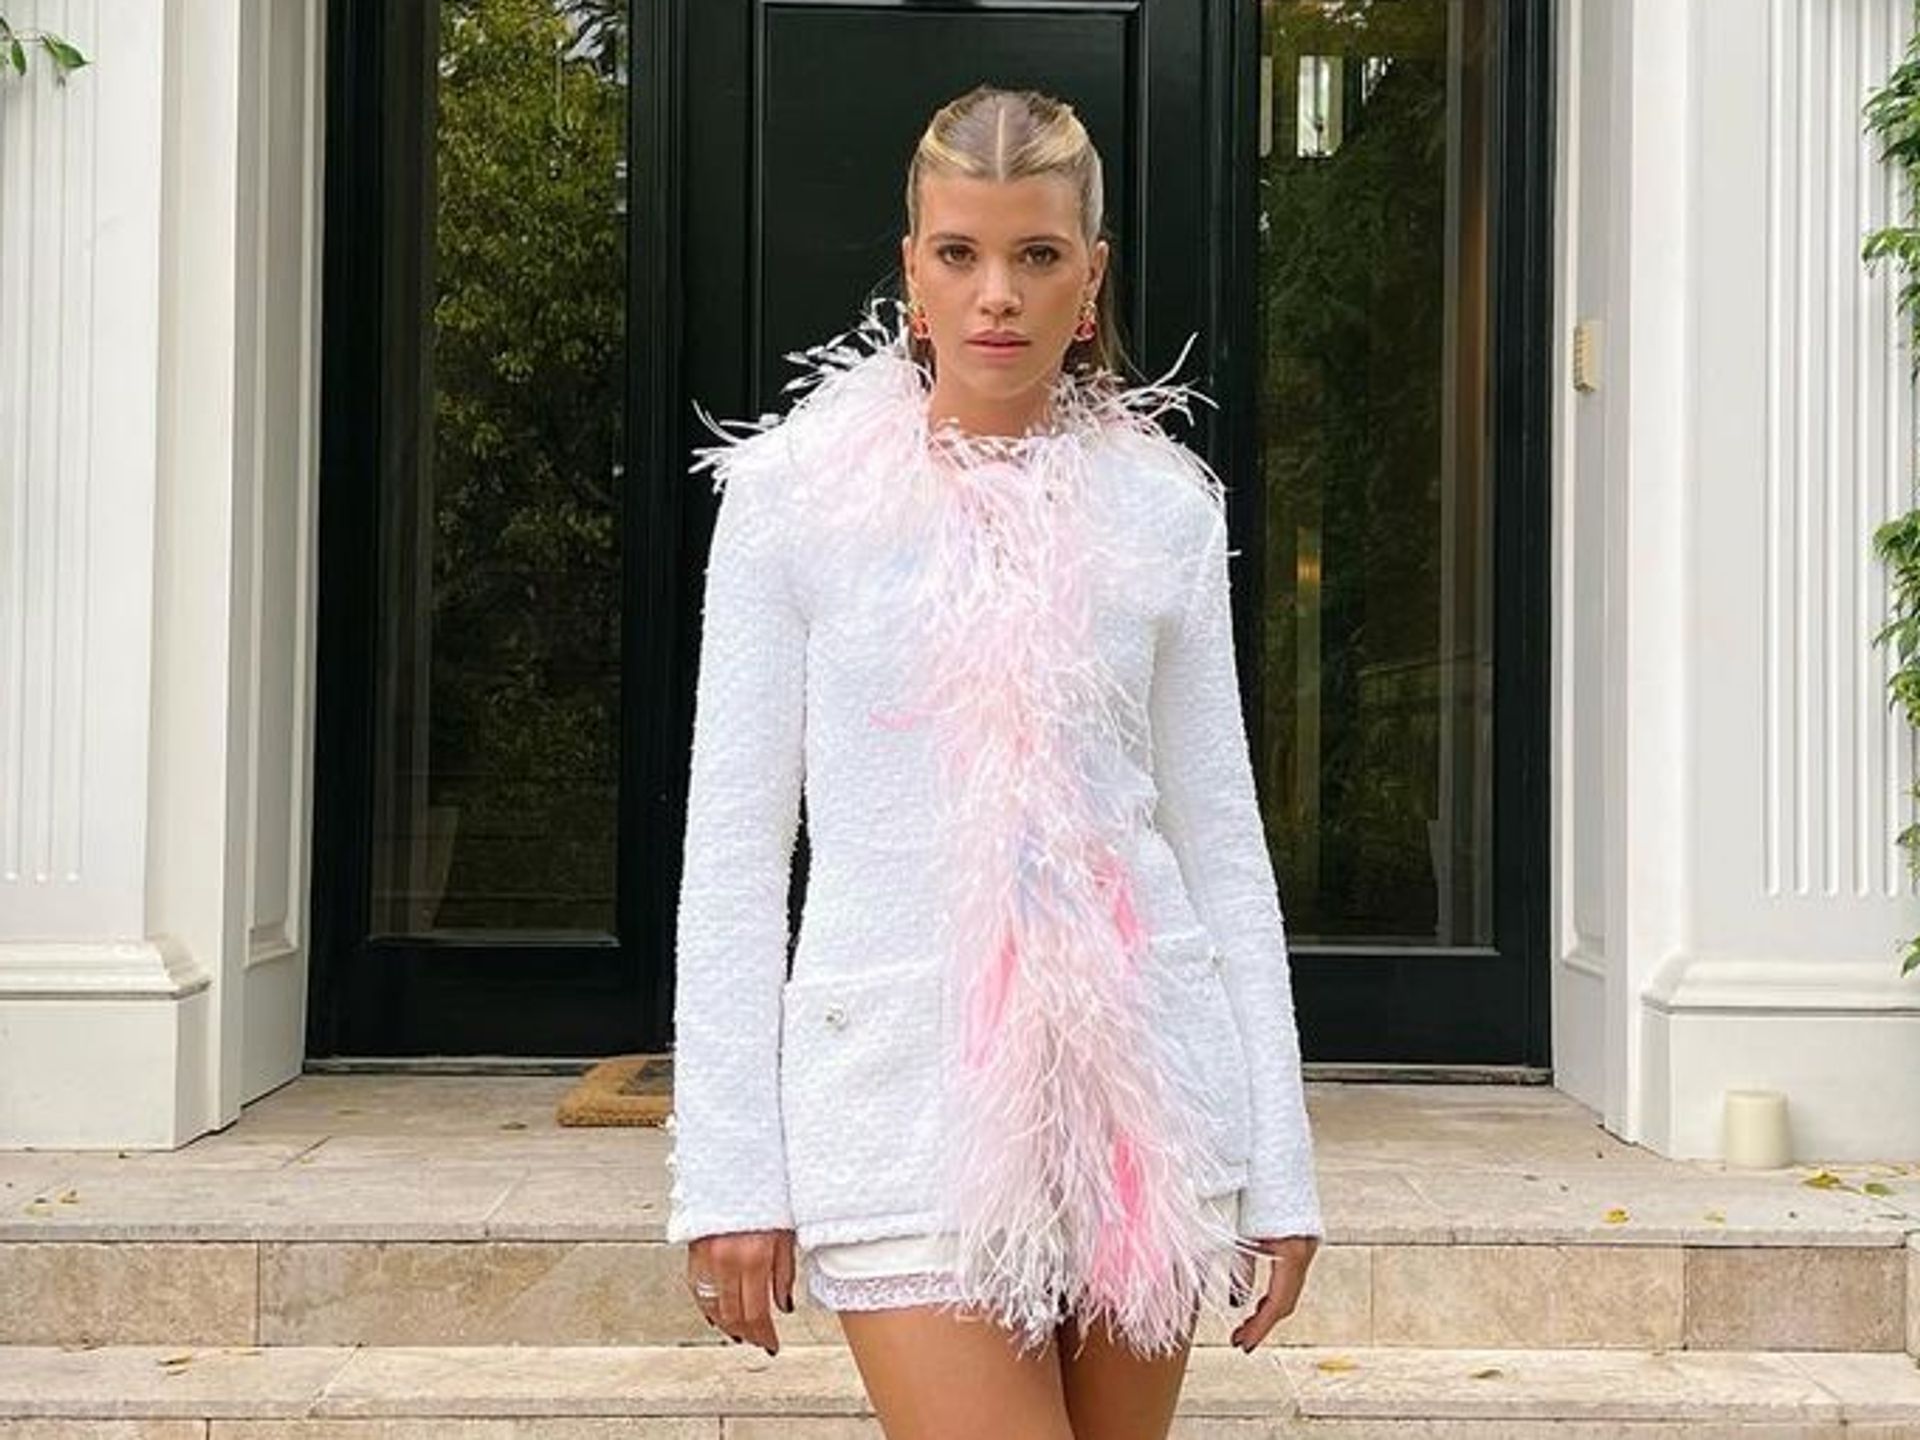 These are the makeup products Sofia Richie used on her wedding day